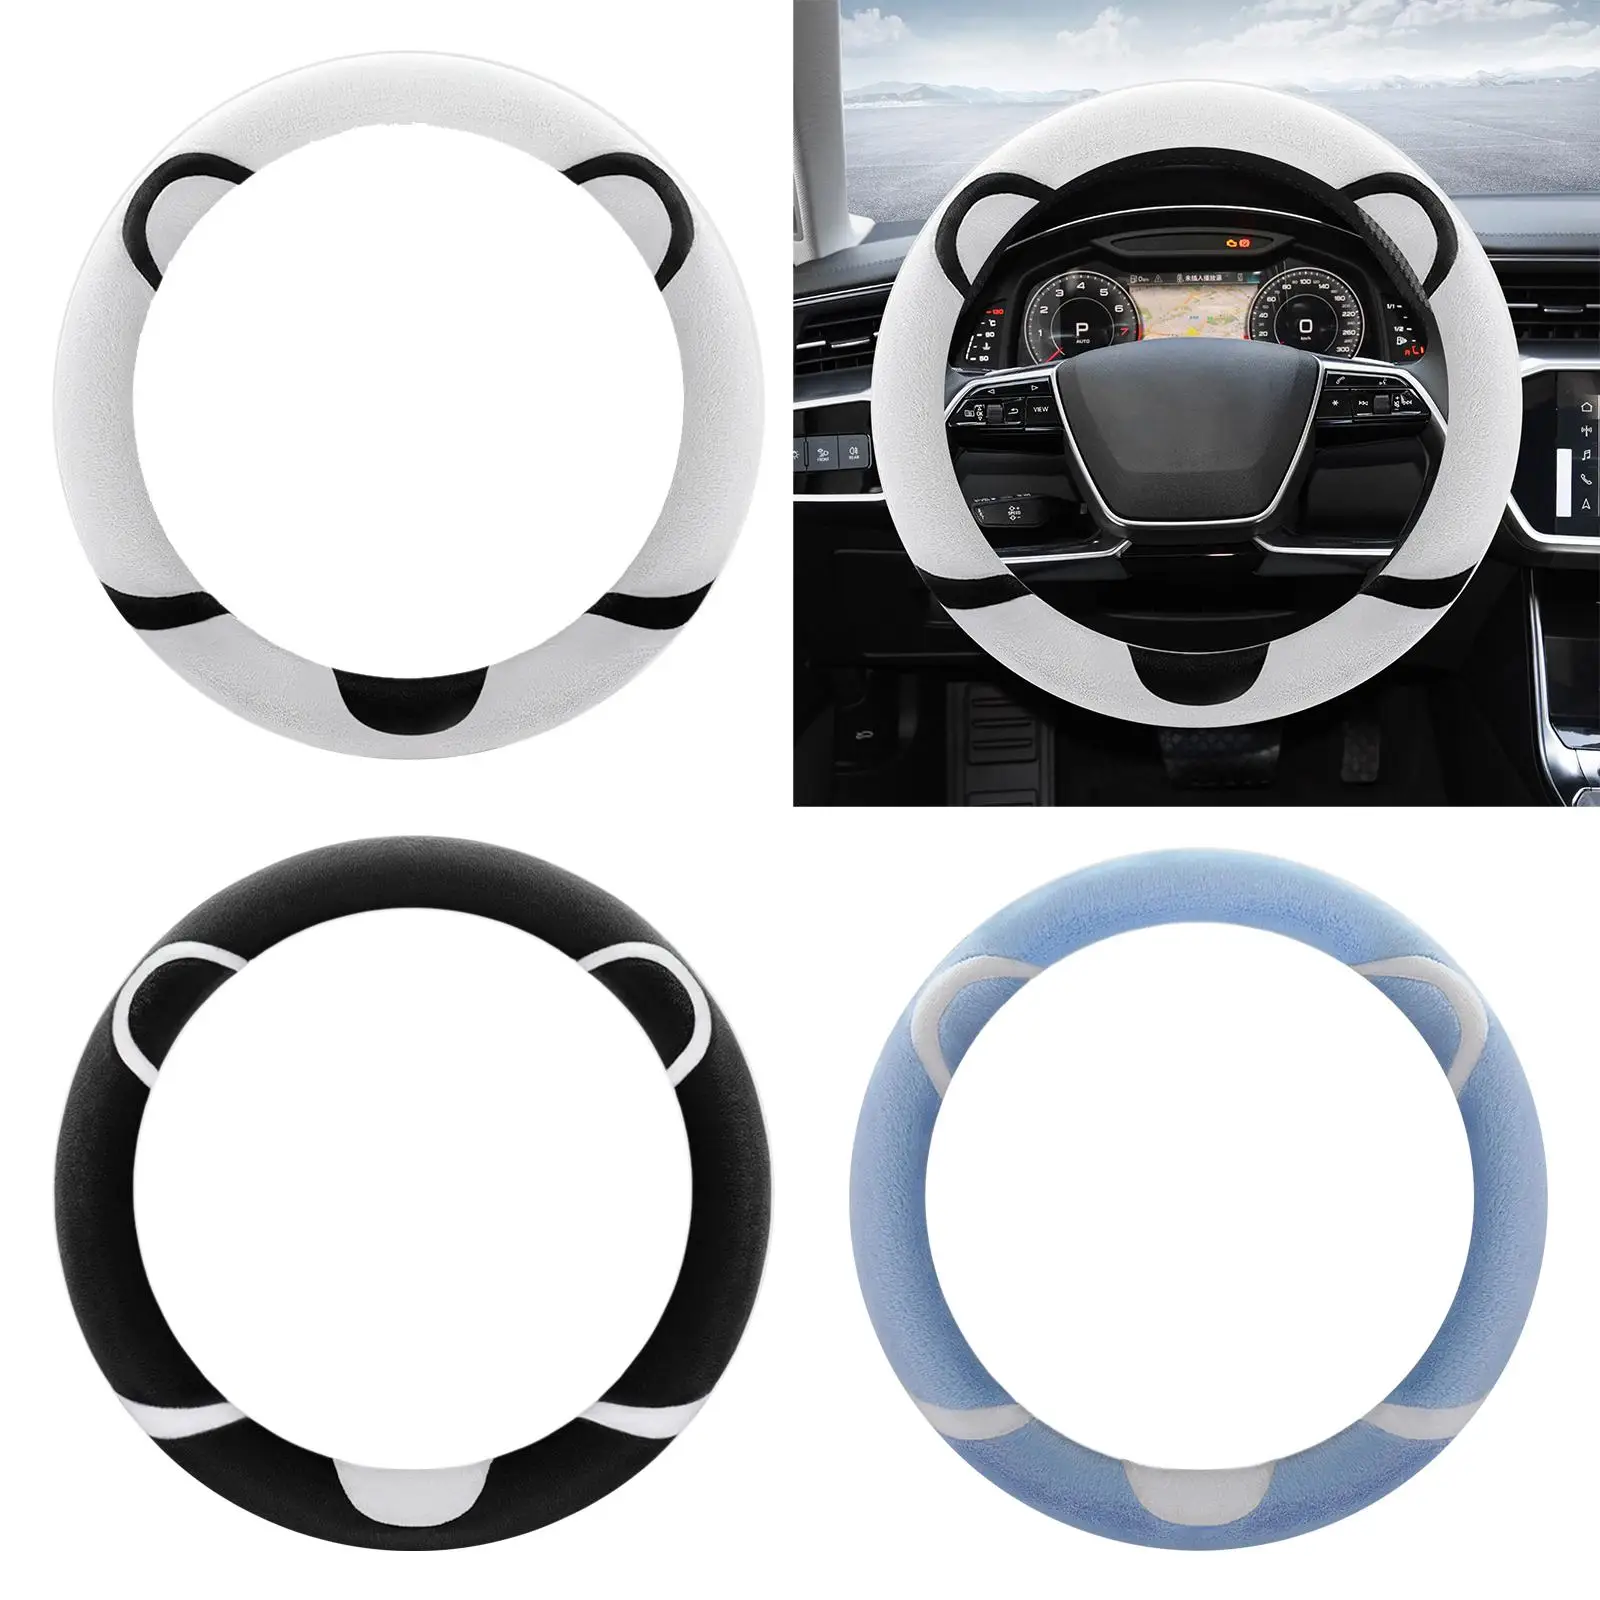 Round Car Steering Wheel Cover Anti Slip Interior Decoration Comfortable Protection Protective Cover Plush Steering Wheel Cover